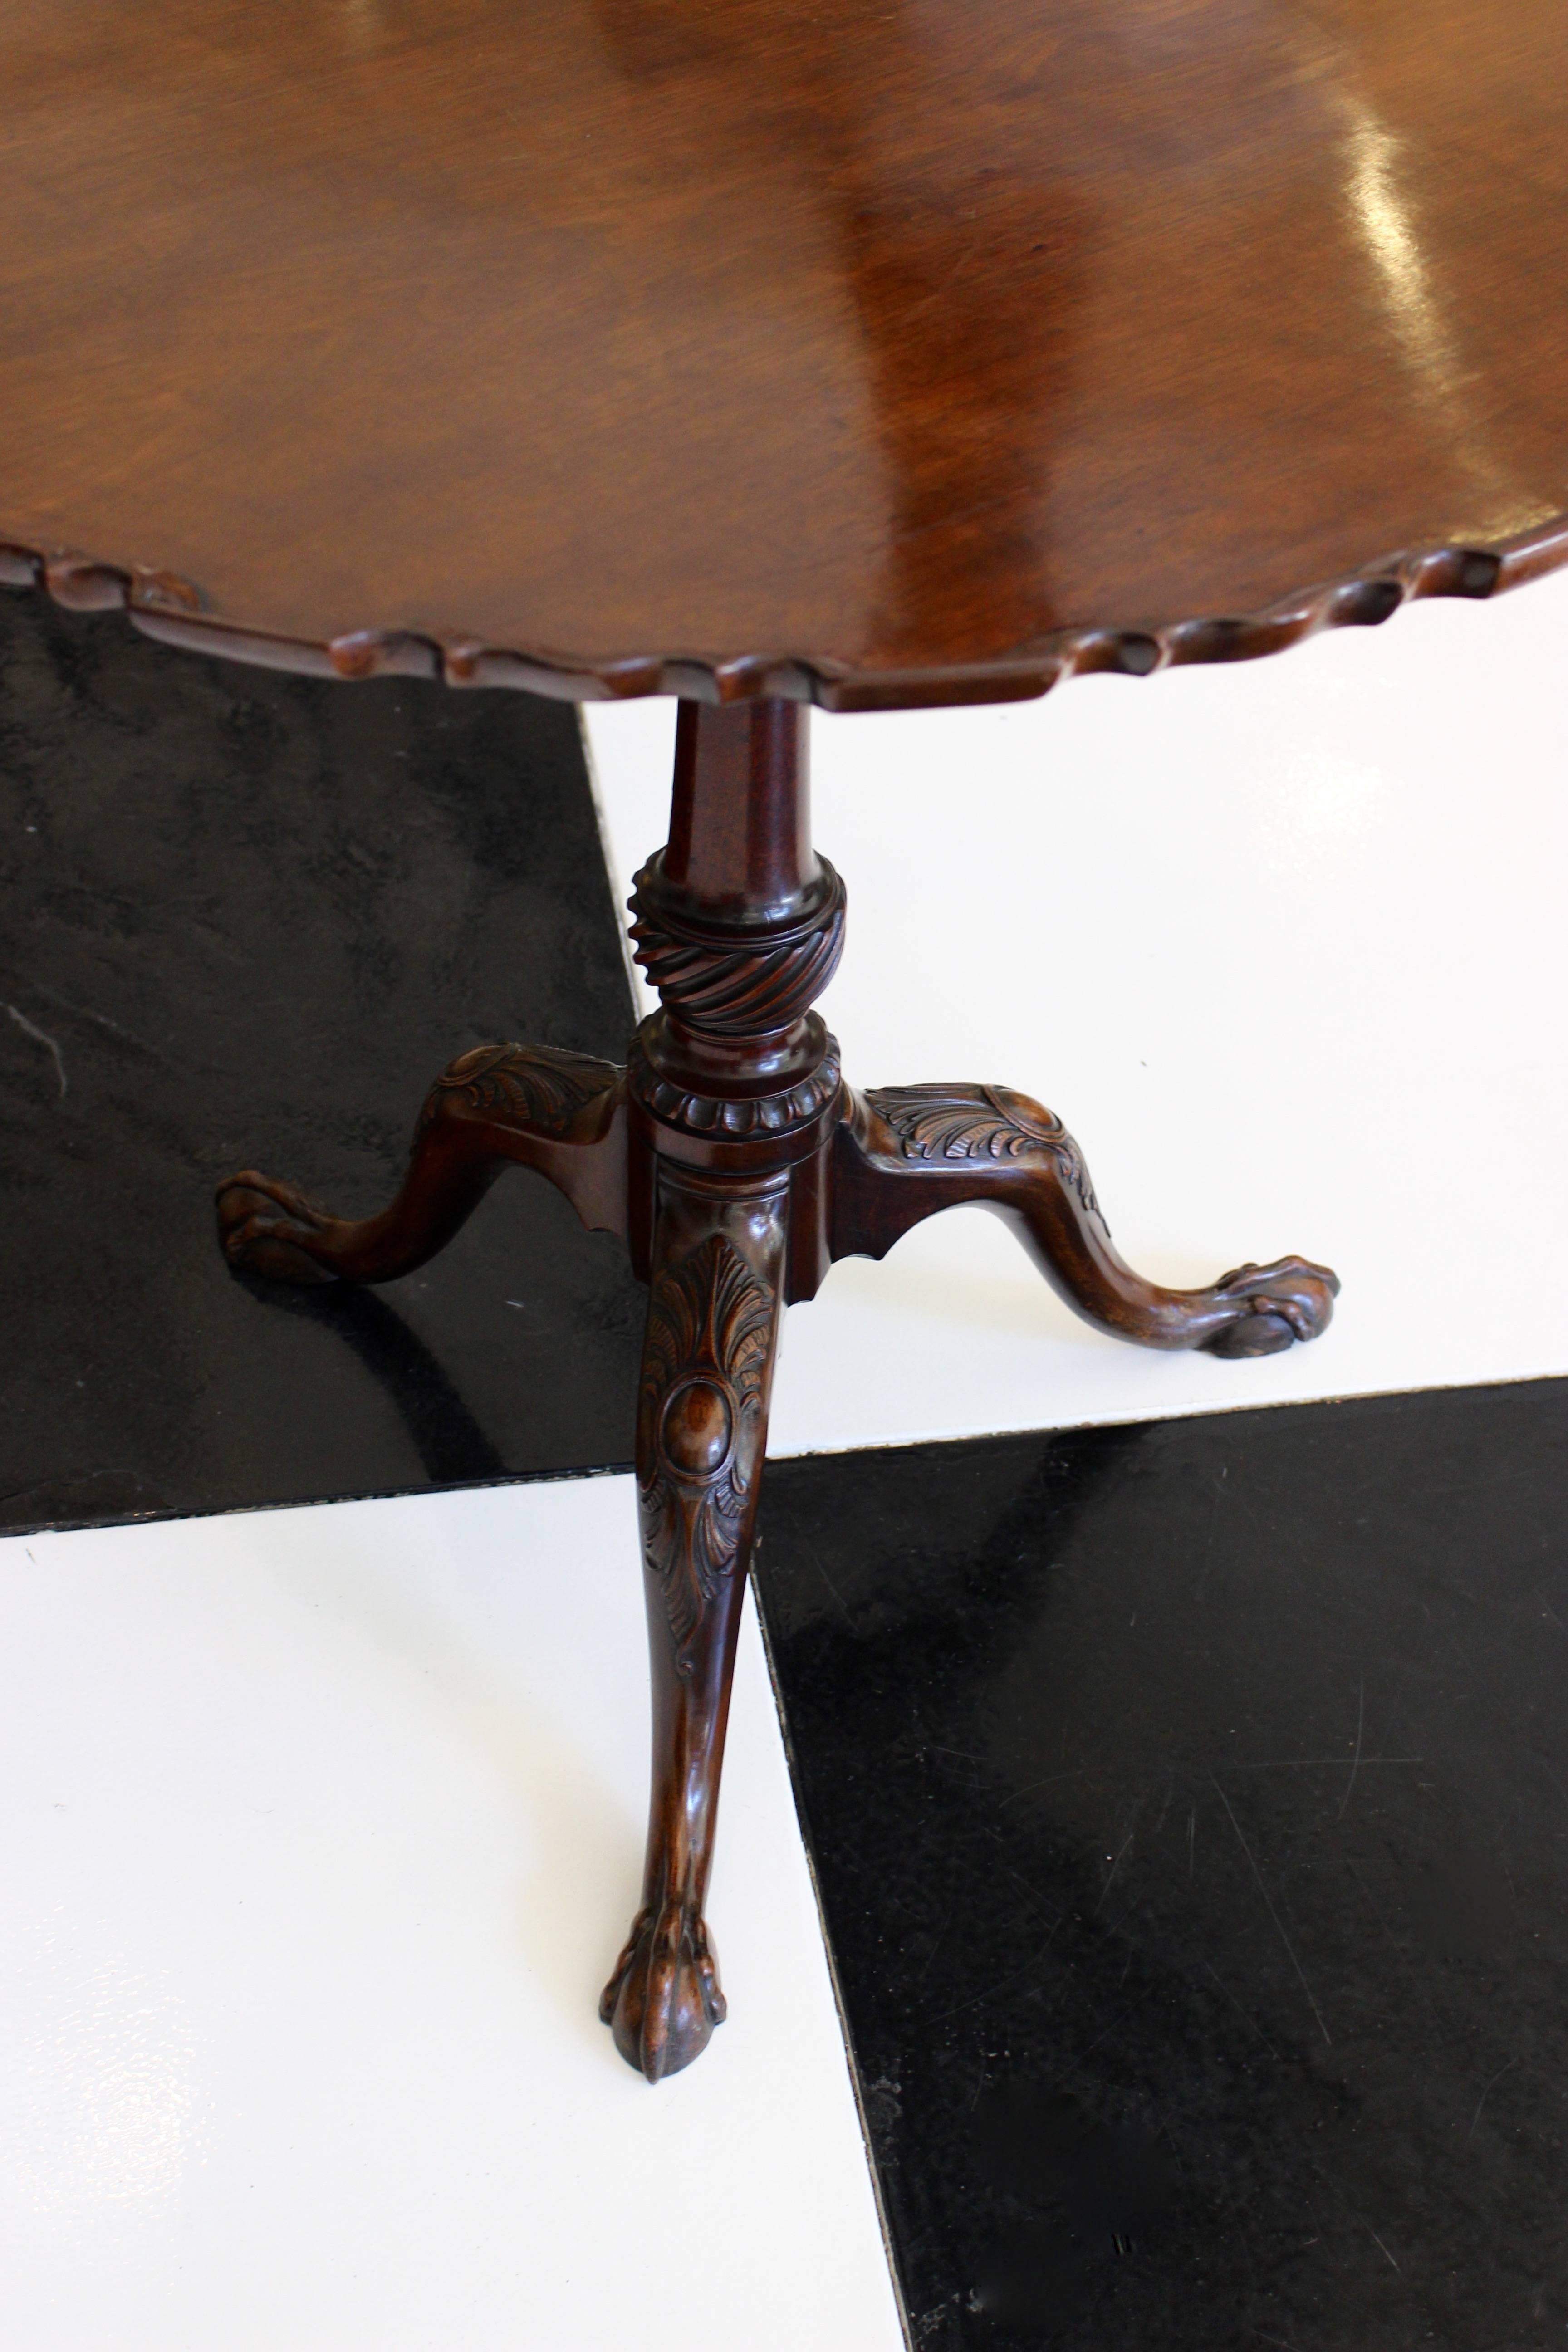 An English George II period mahogany tripod table from the mid-18th century, with pie-crust tilt-top, turned baluster stem and carved cabriole legs. Born during the third quarter of the 18th century, this English mahogany table features a circular